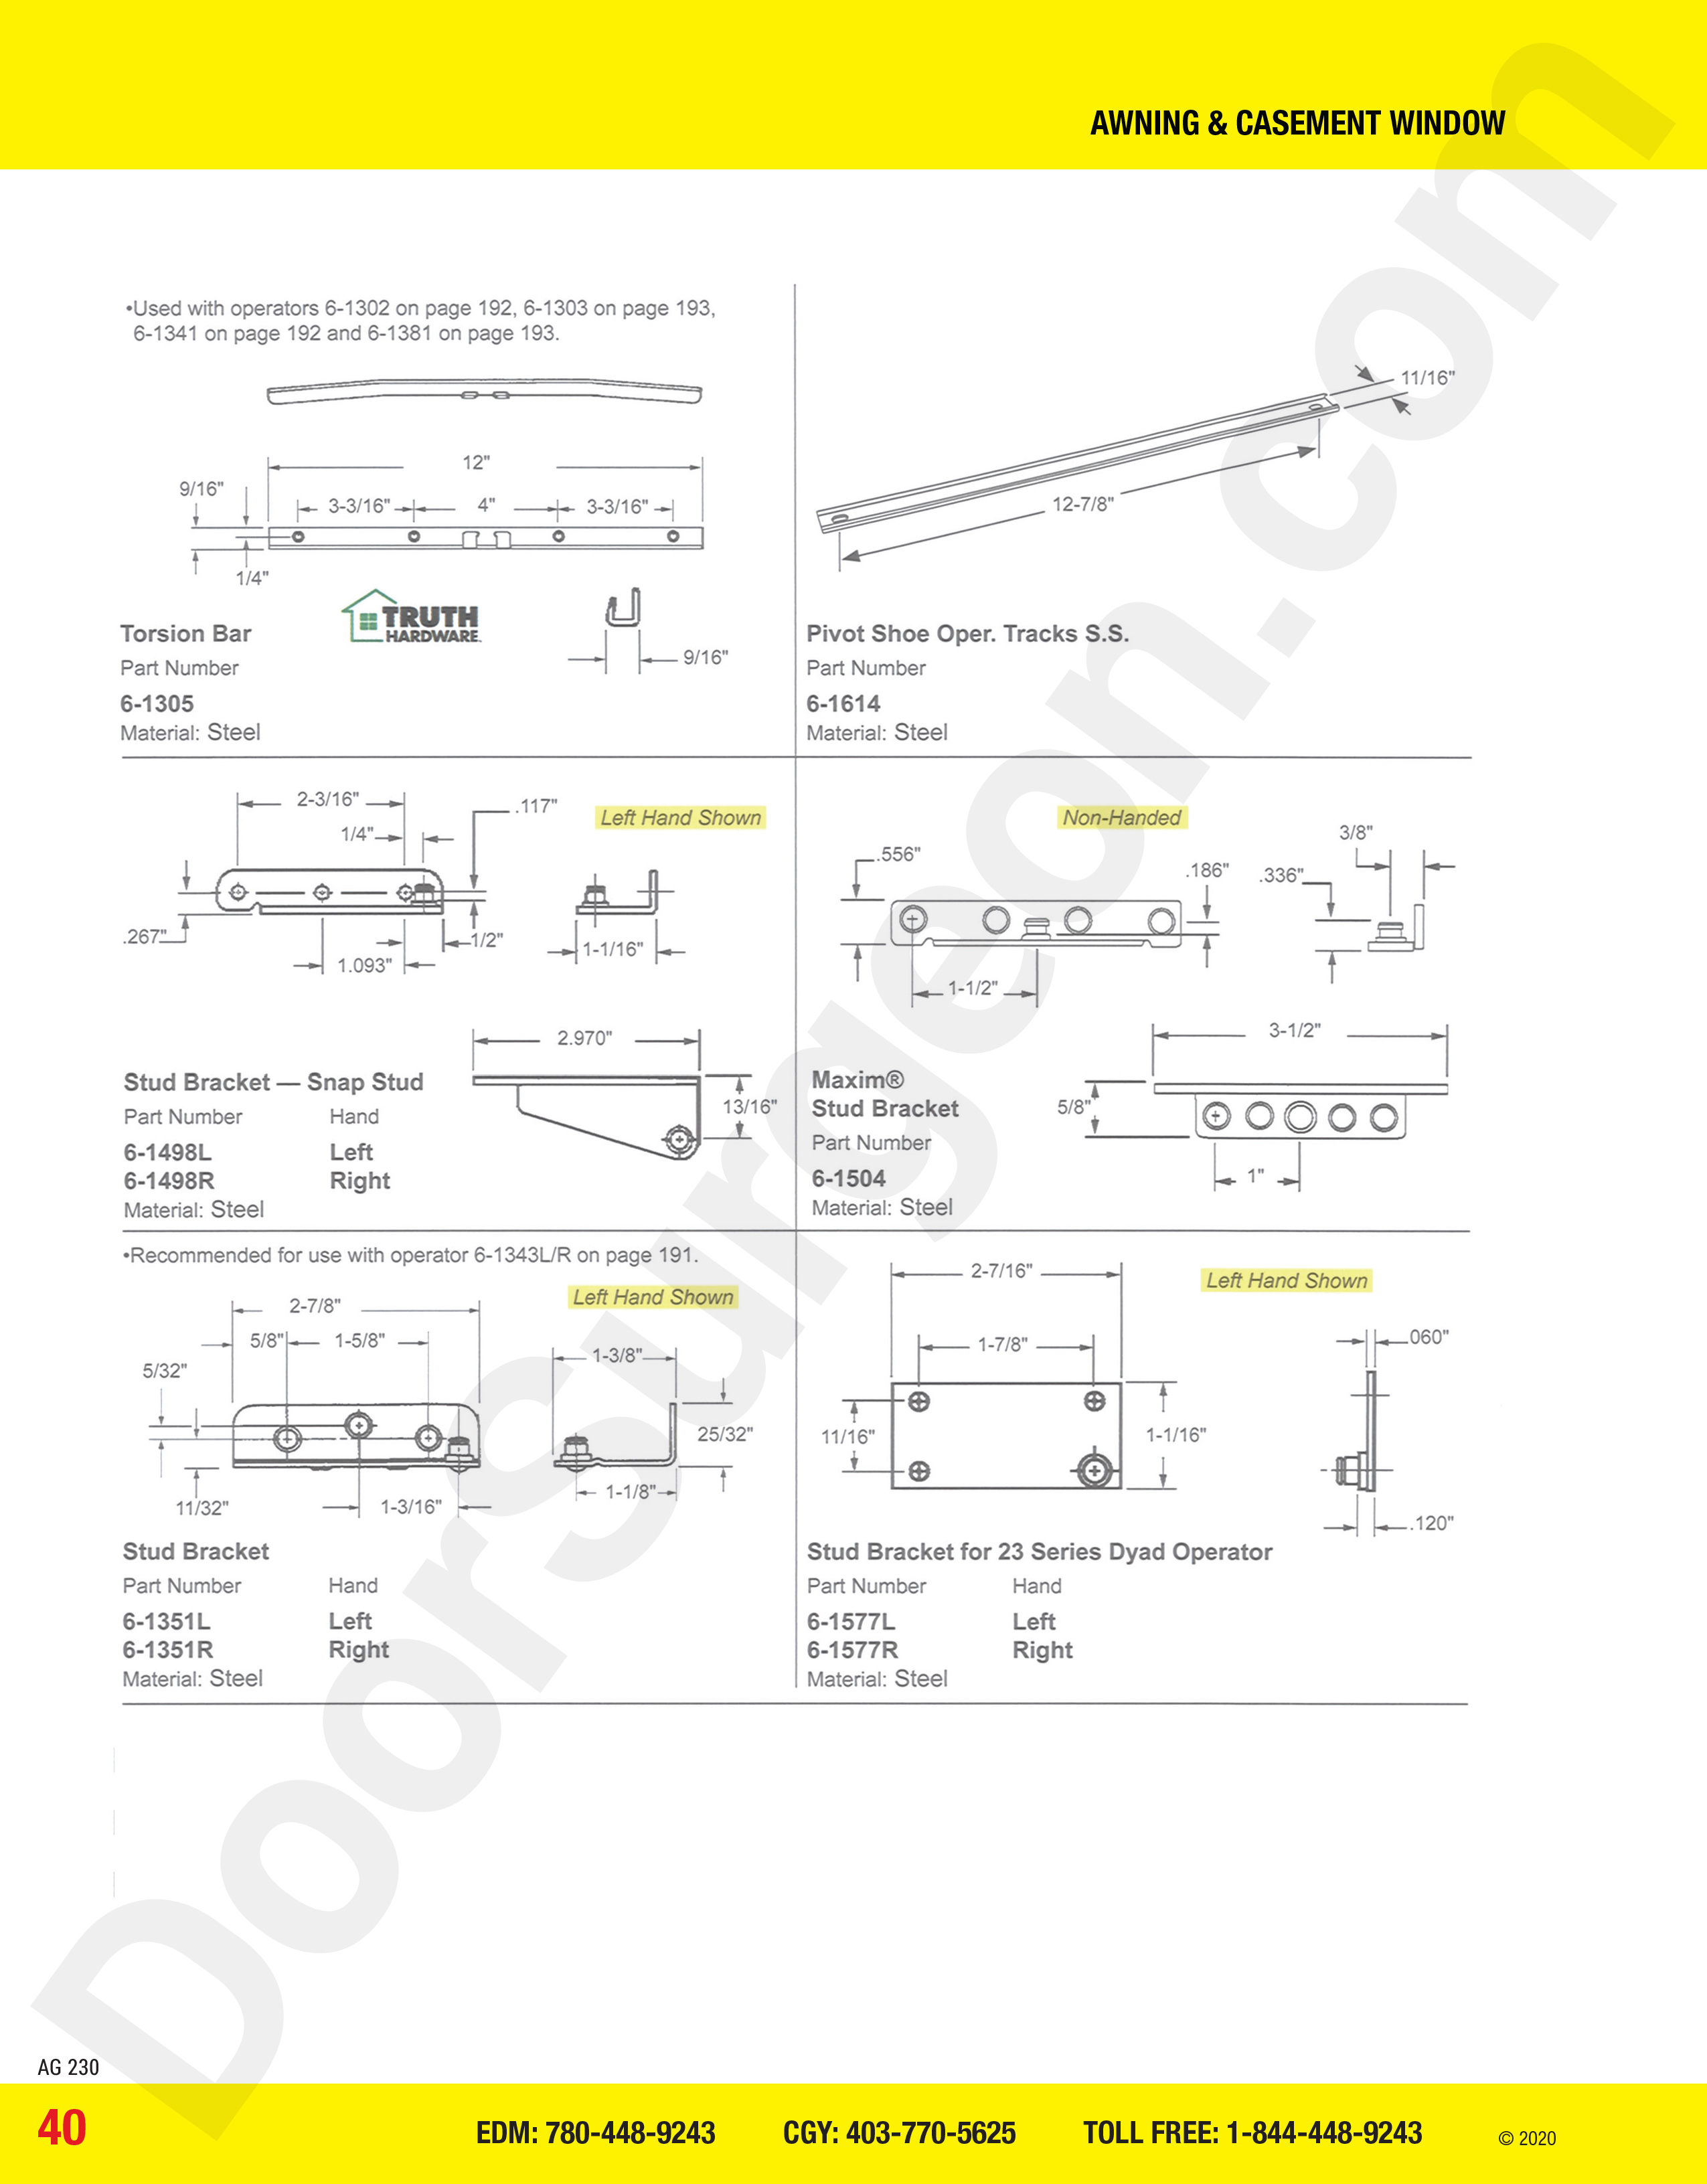 awning and casement window parts for stud brackets